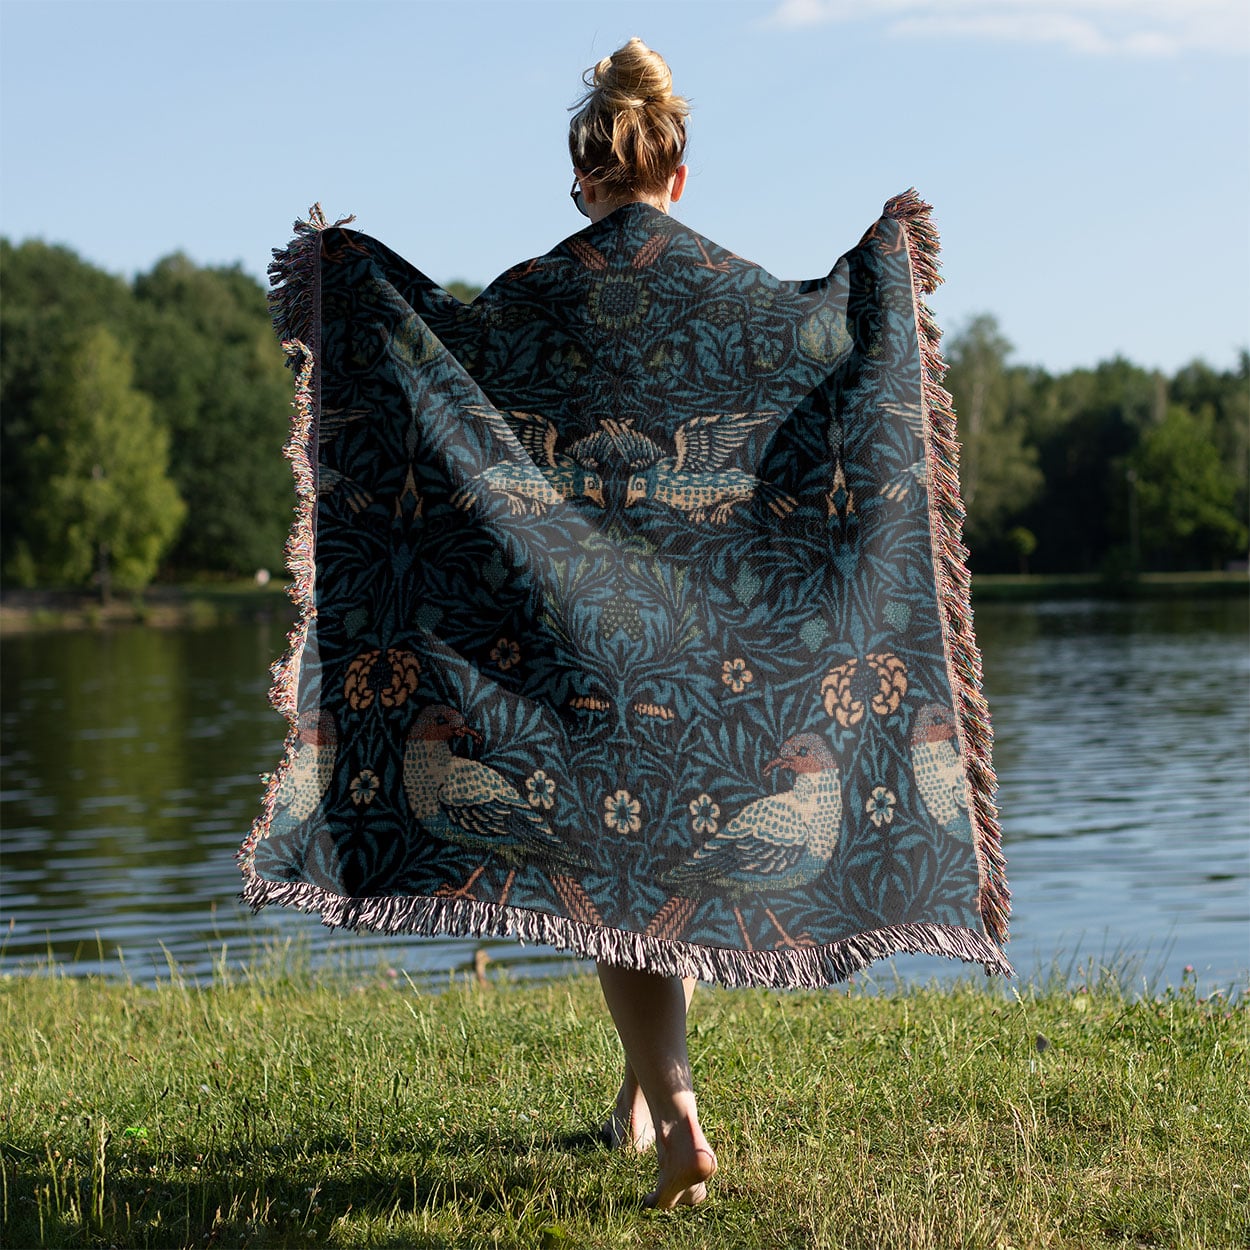 Blue Nature Pattern Woven Blanket Held on a Woman's Back Outside